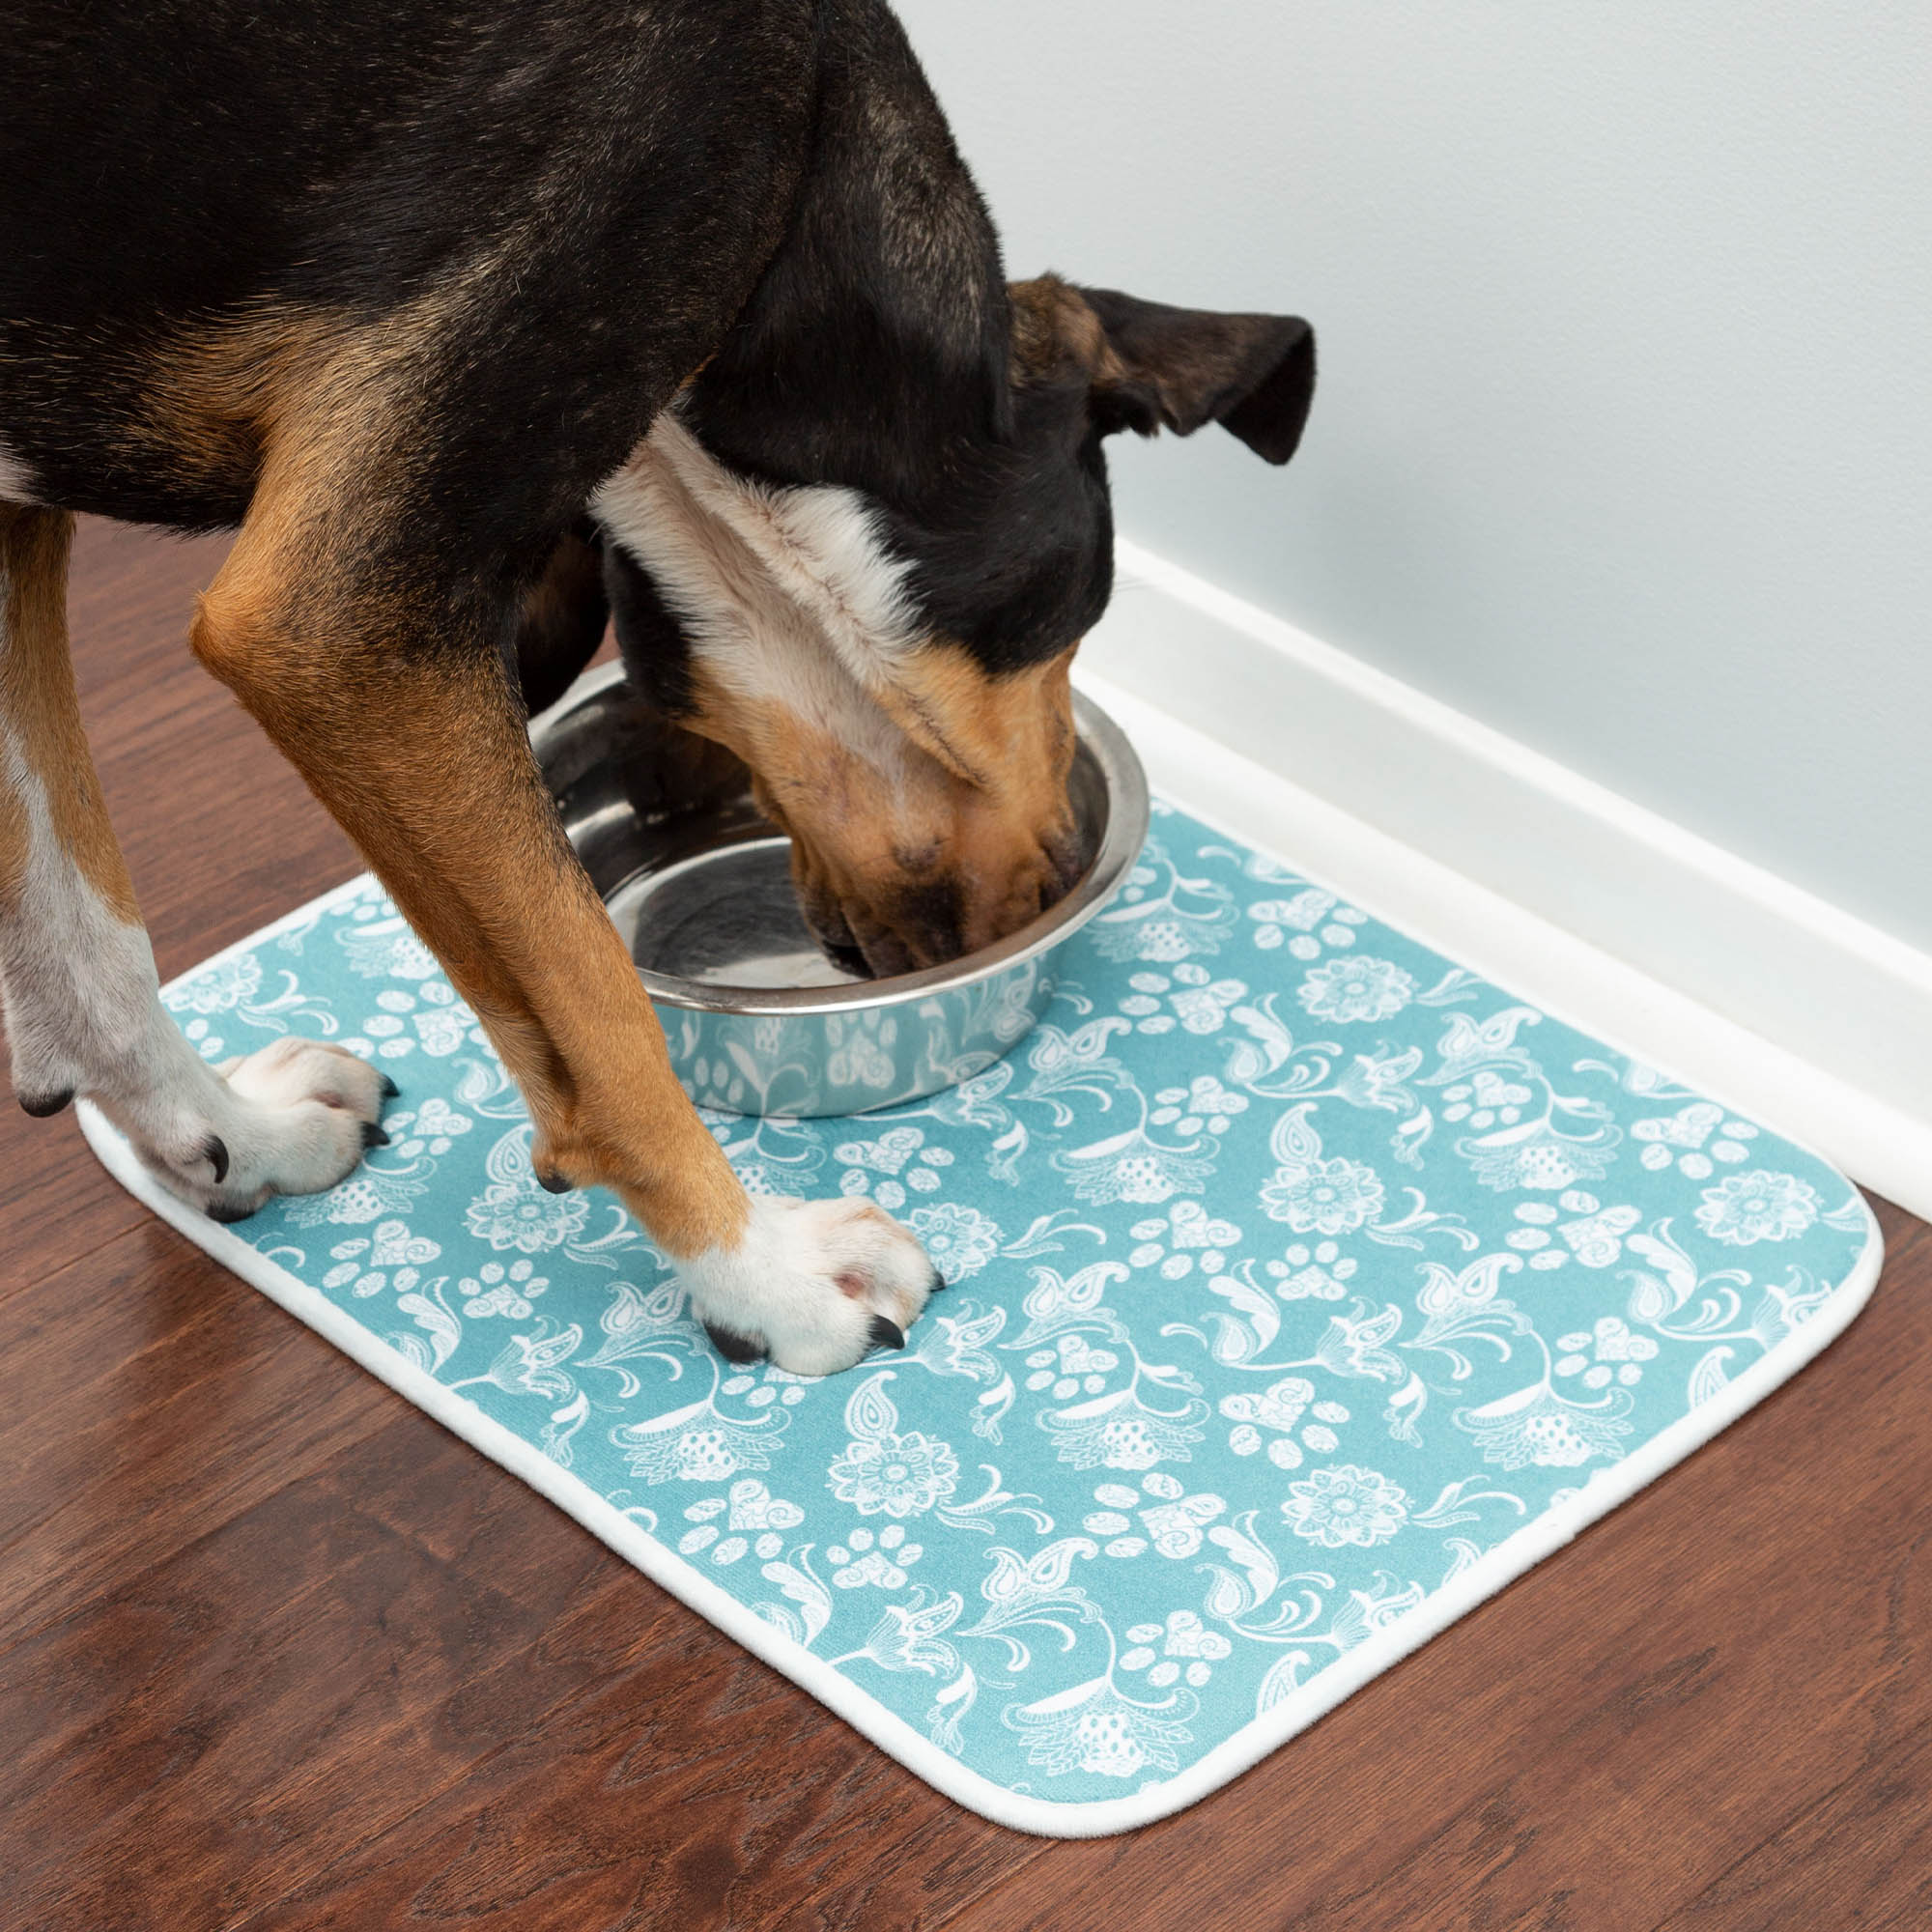 Absorbent Food Mats For Dogs